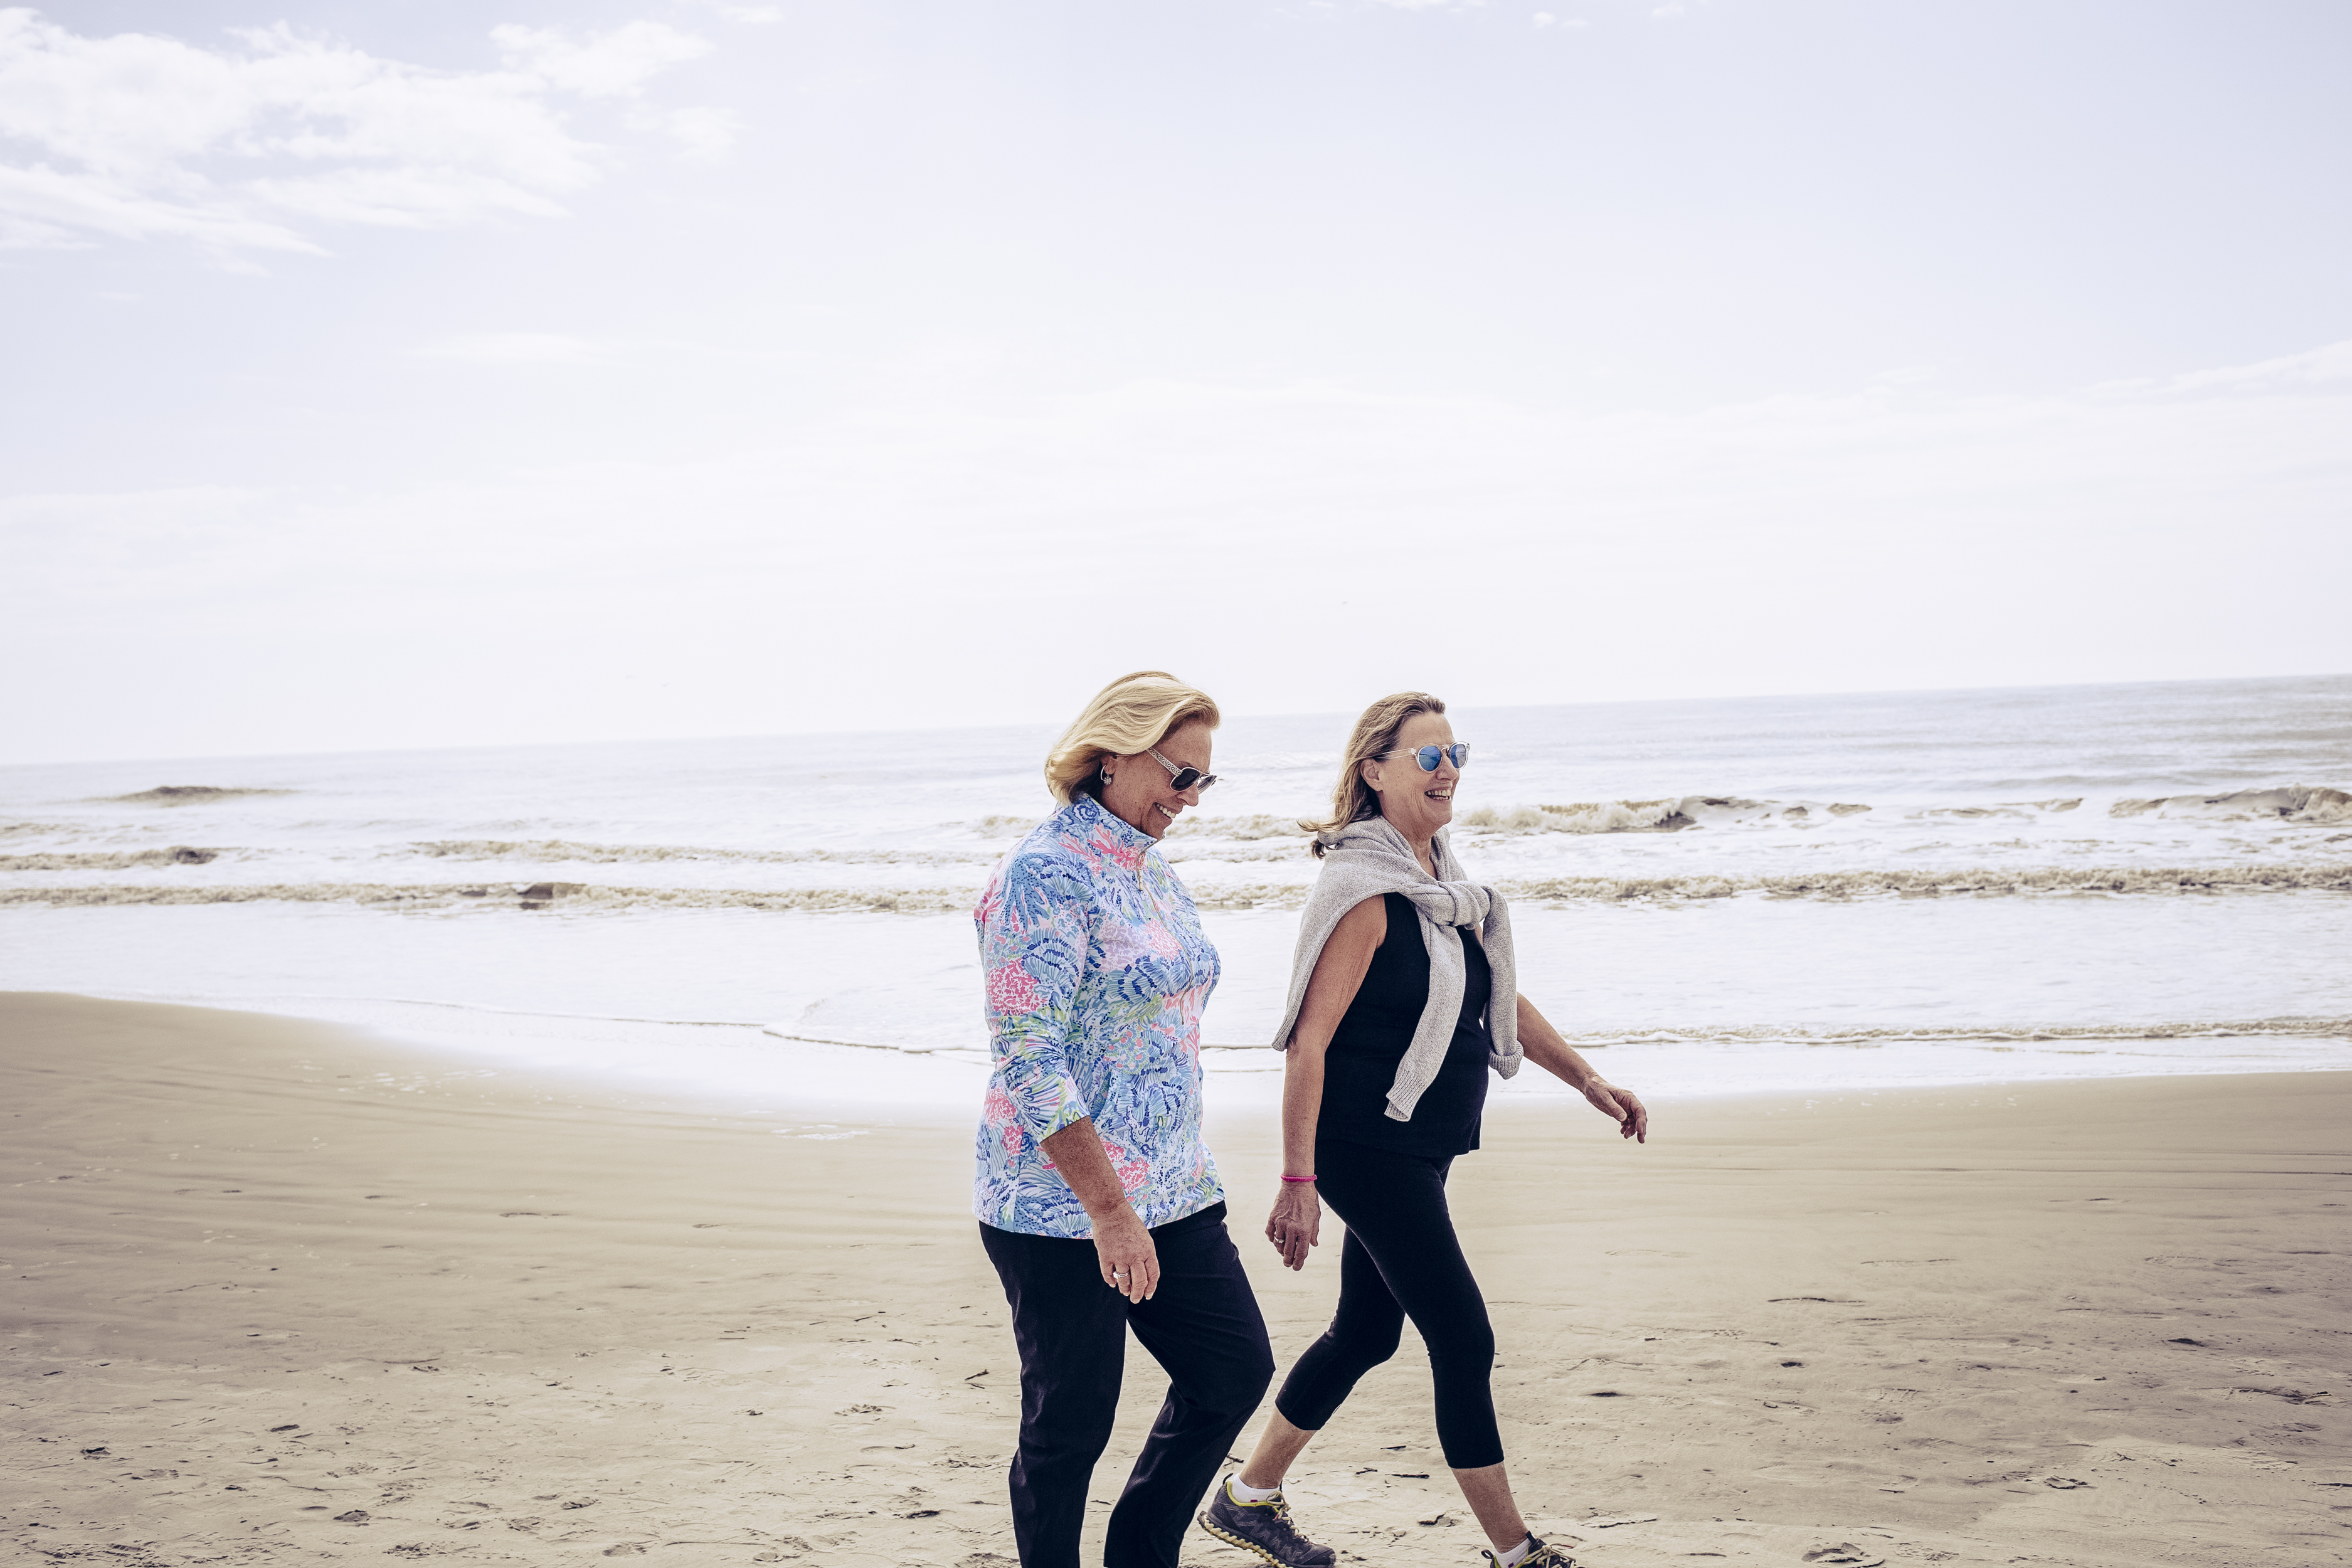 Taking a walk is one of the most powerful ways to help manage IBD and also stay connected with friends. (The Good Brigade—SGetty Images)